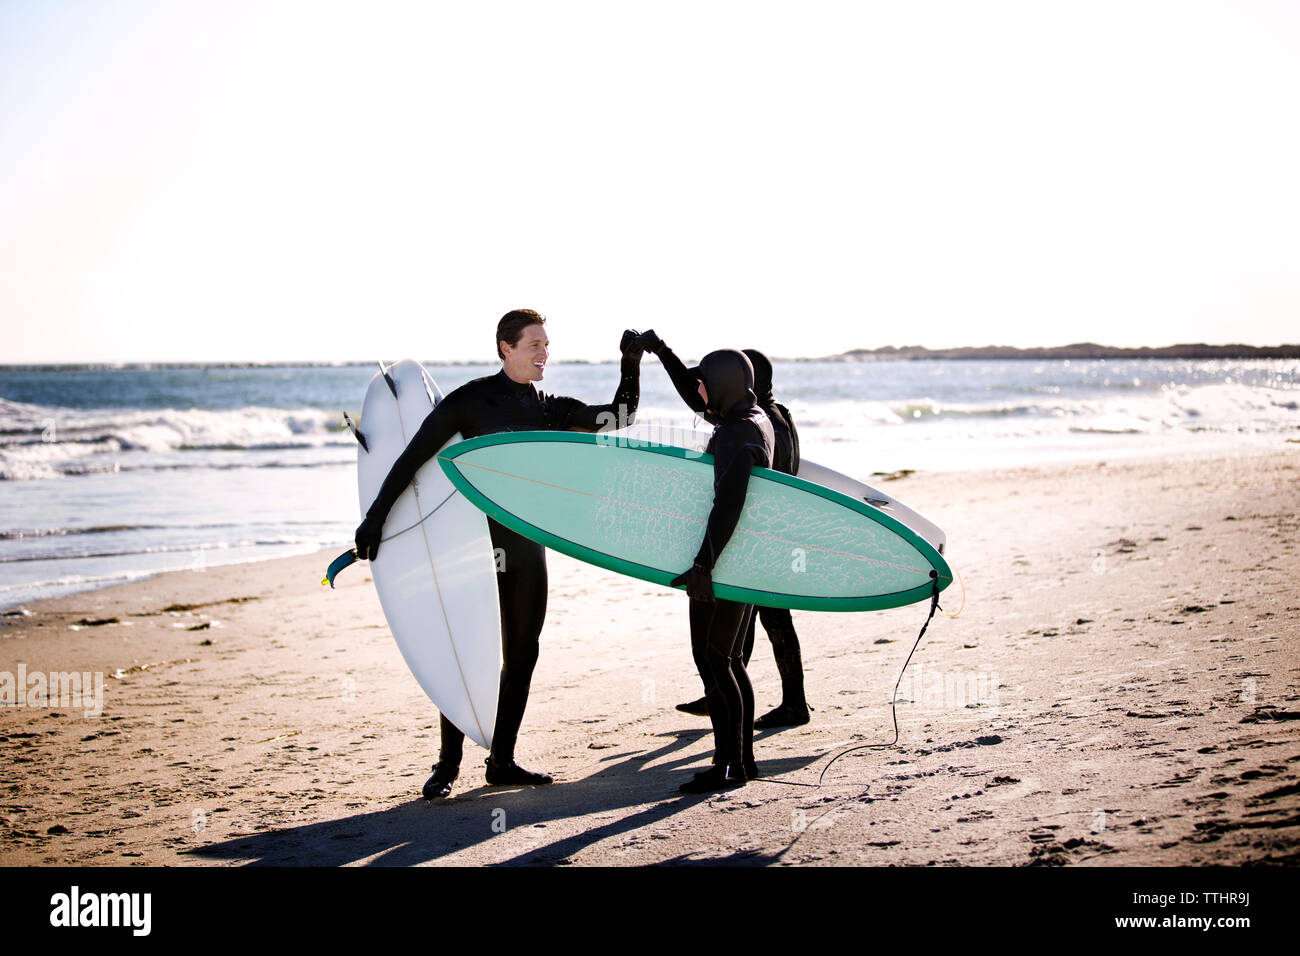 Surfers doing fist bump while standing at beach Stock Photo